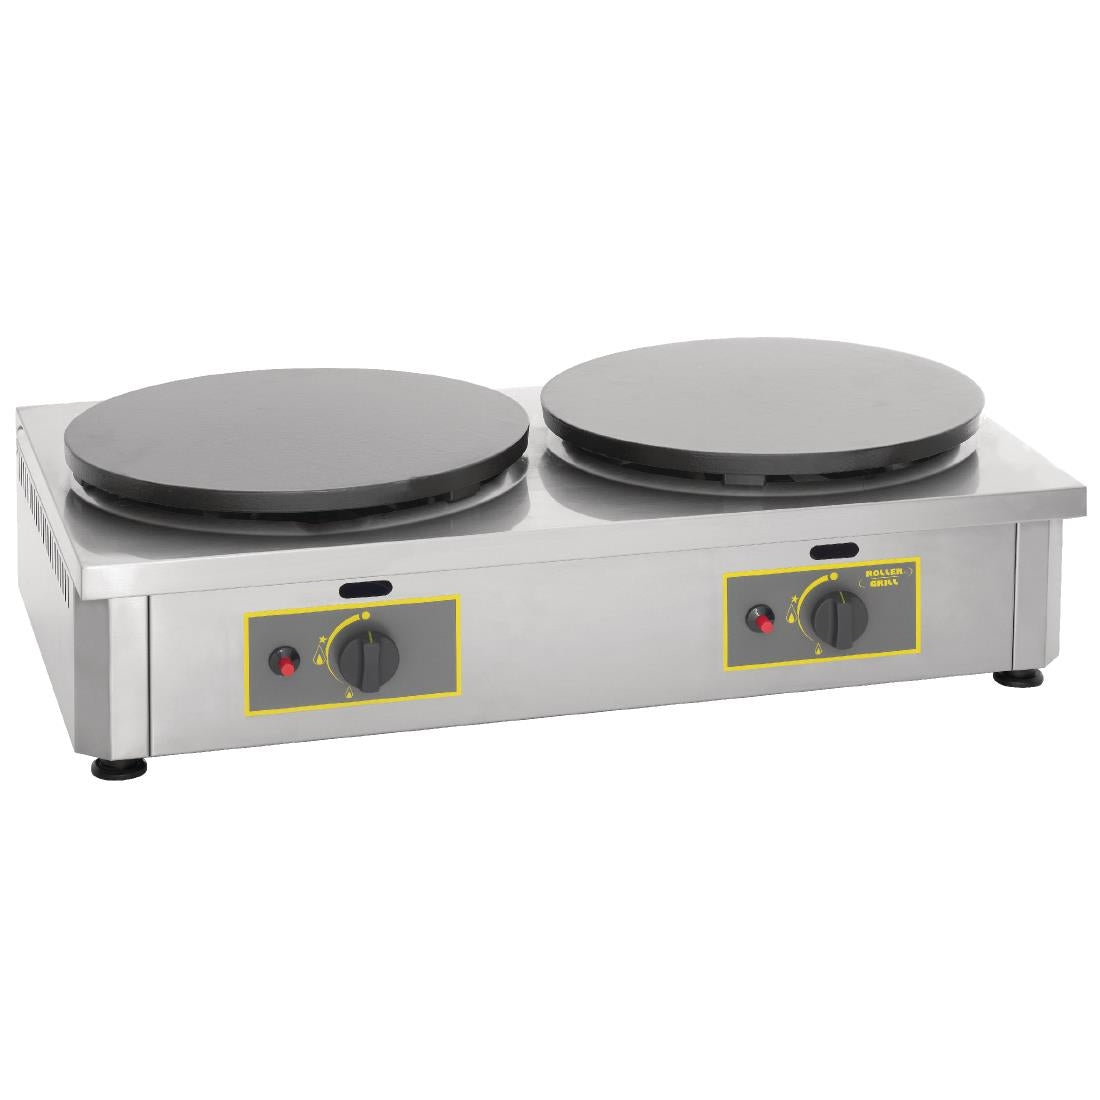 GD346-P Roller Grill Double LPG Gas Crepe Maker CDG400 JD Catering Equipment Solutions Ltd